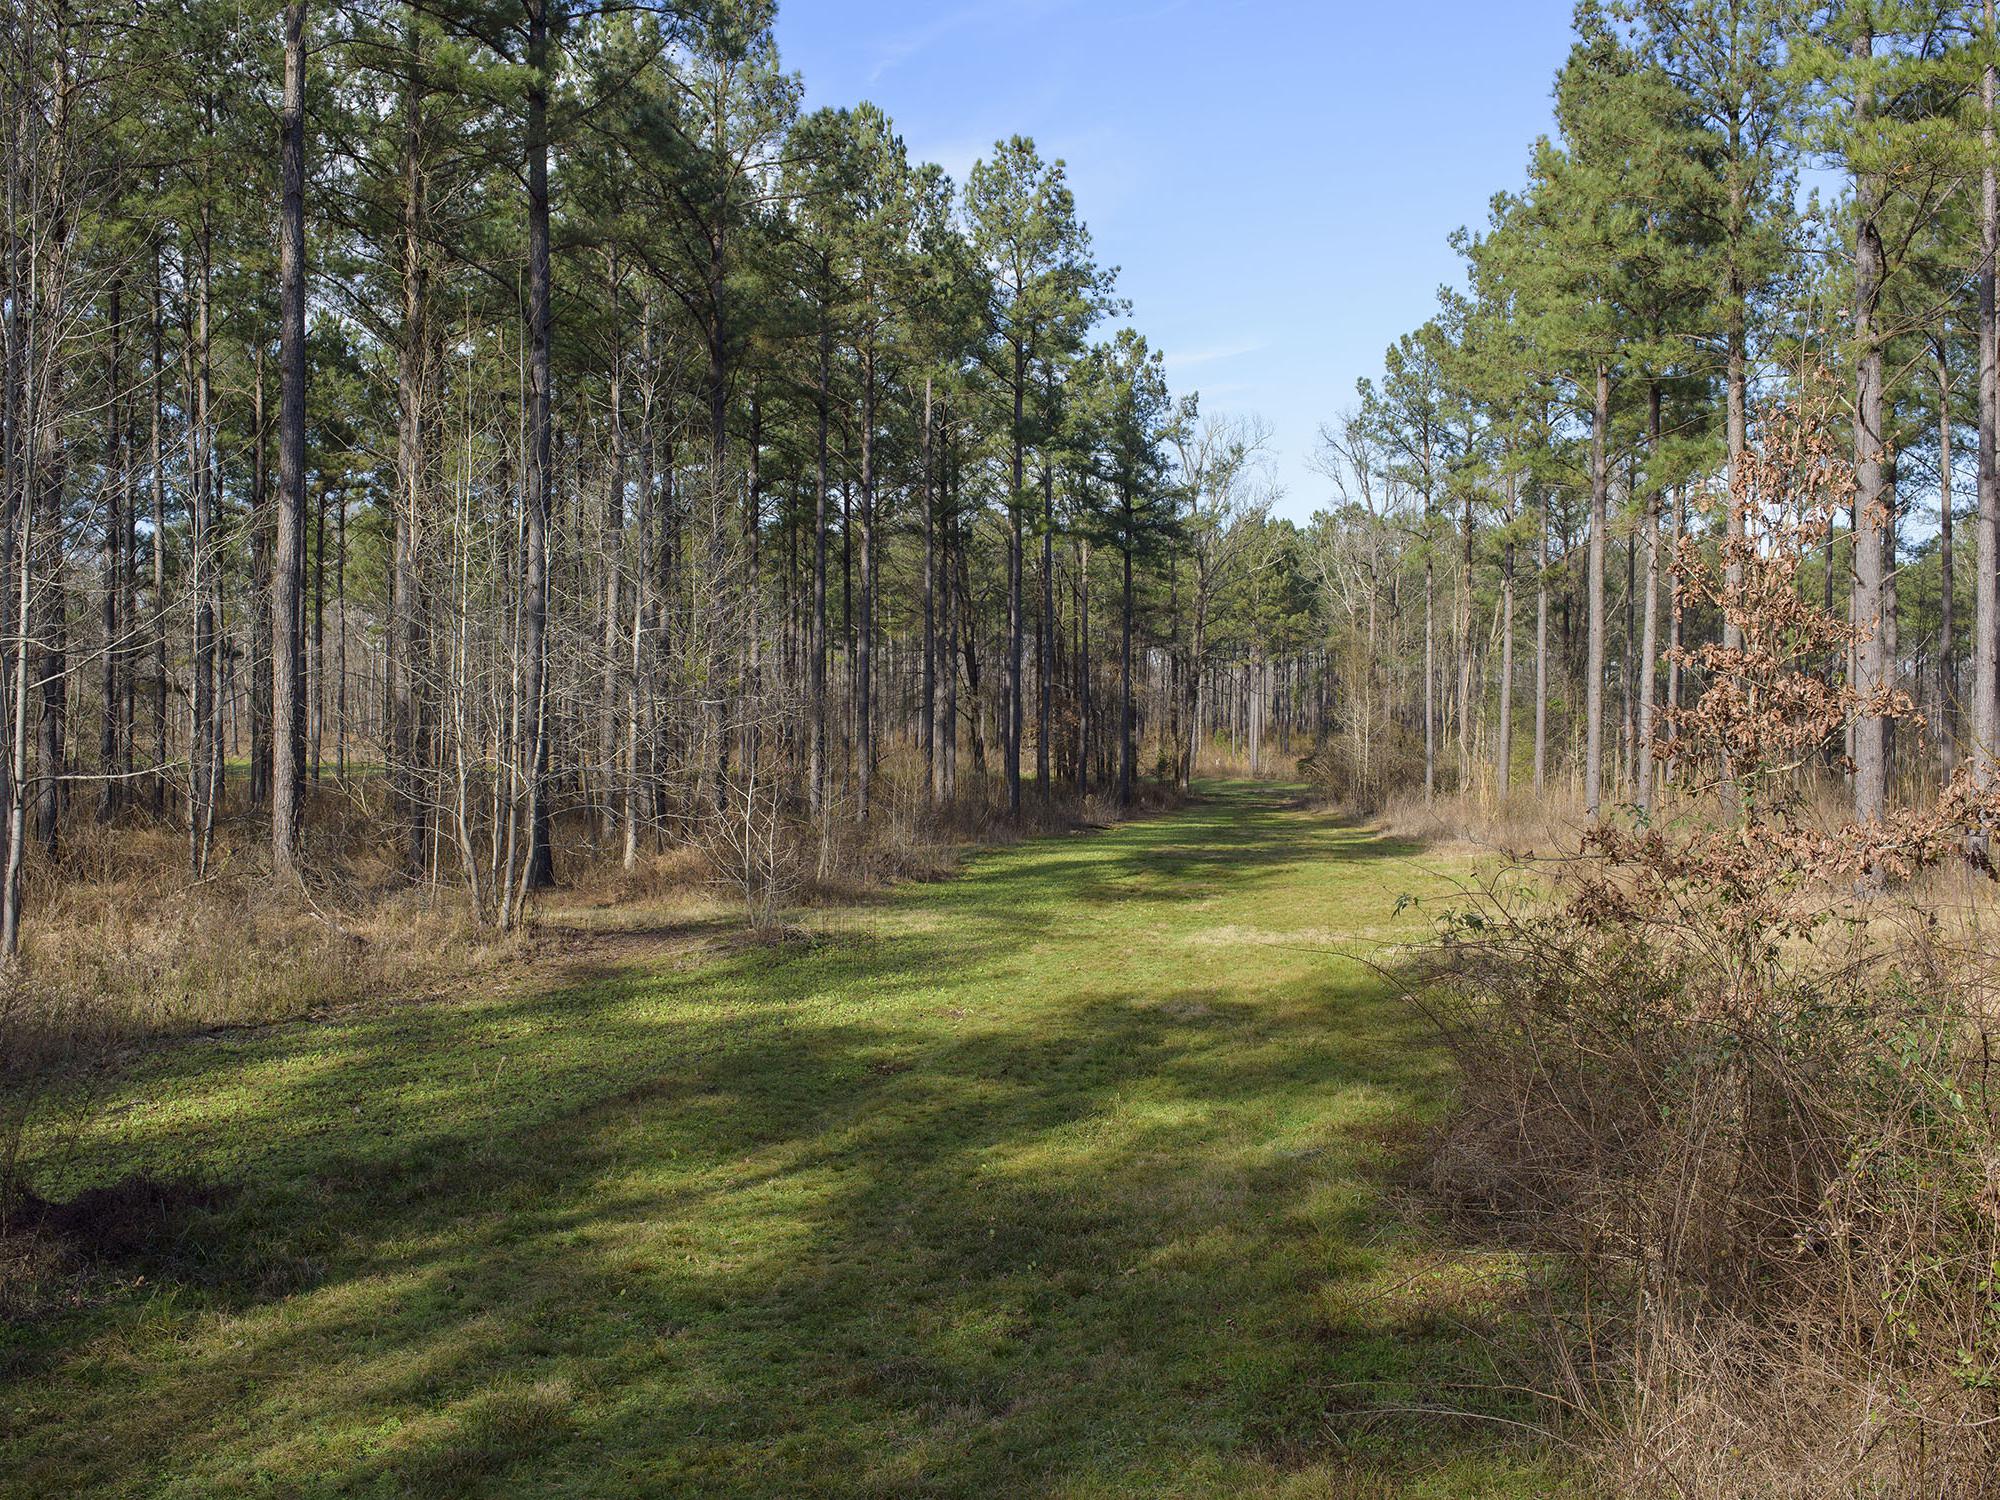 With a new sawmill in central Mississippi and the prospect of more being built, timber plots like this one at Coontail Farm in Aberdeen will be a good investment long-term despite middling timber market conditions now. (File photo by MSU Extension Service/Kevin Hudson)